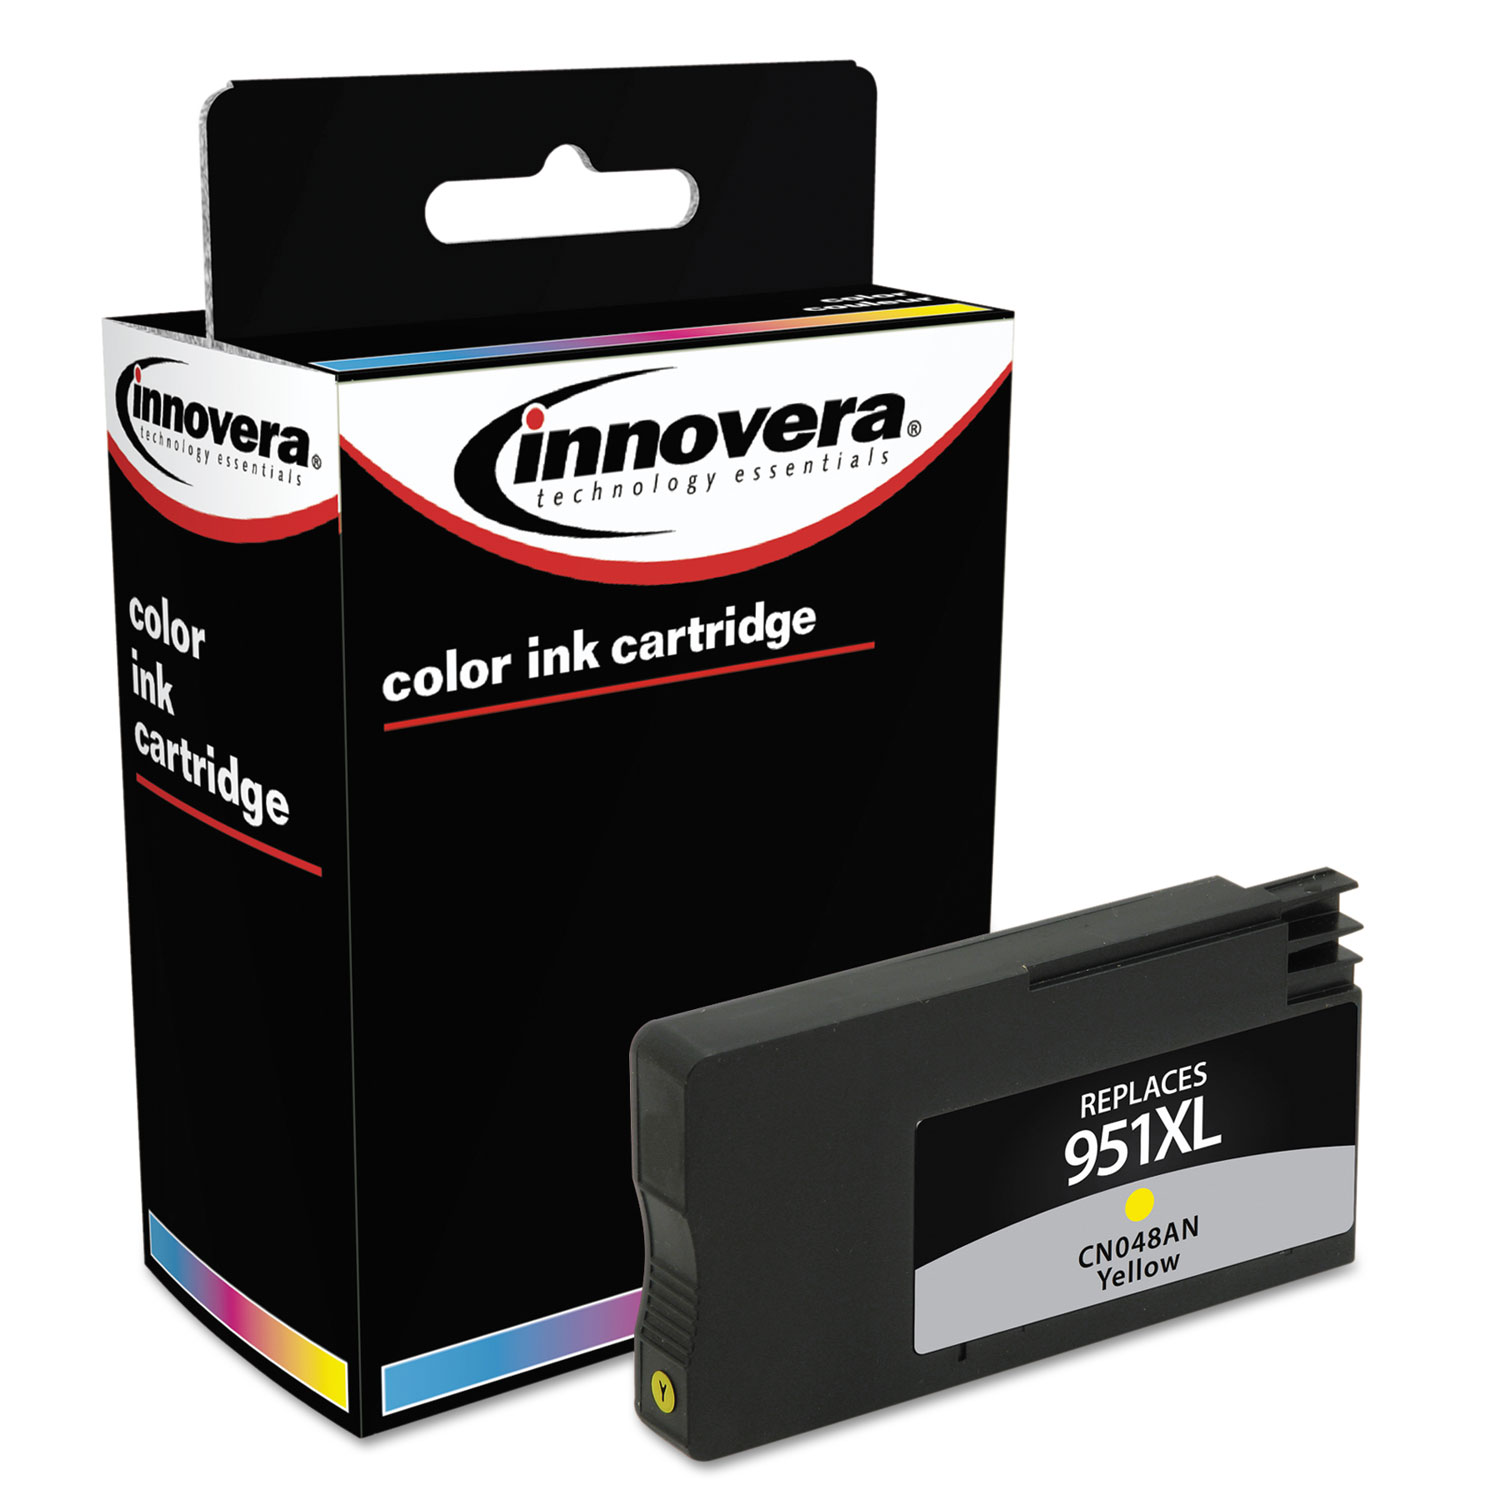  Innovera IVR951XLY Remanufactured CN048AN (951XL) High-Yield Ink, 1500 Page-Yield, Yellow (IVR951XLY) 